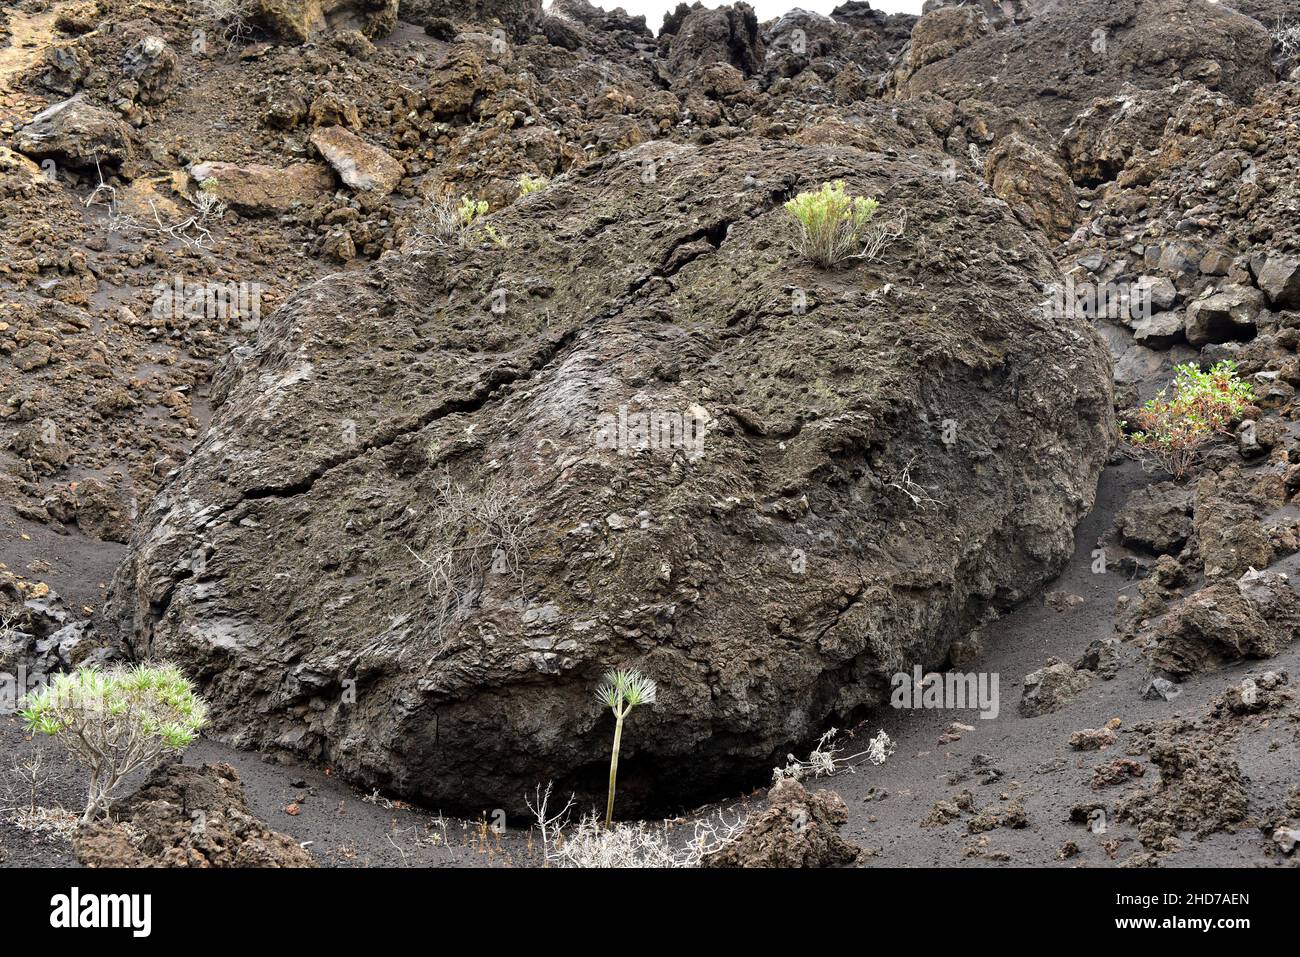 Volcanic bomb (tephra) expelled by Teneguia volcano. This photo was taken in Fuencaliente, La Palma, Canary Islands, Spain. Stock Photo